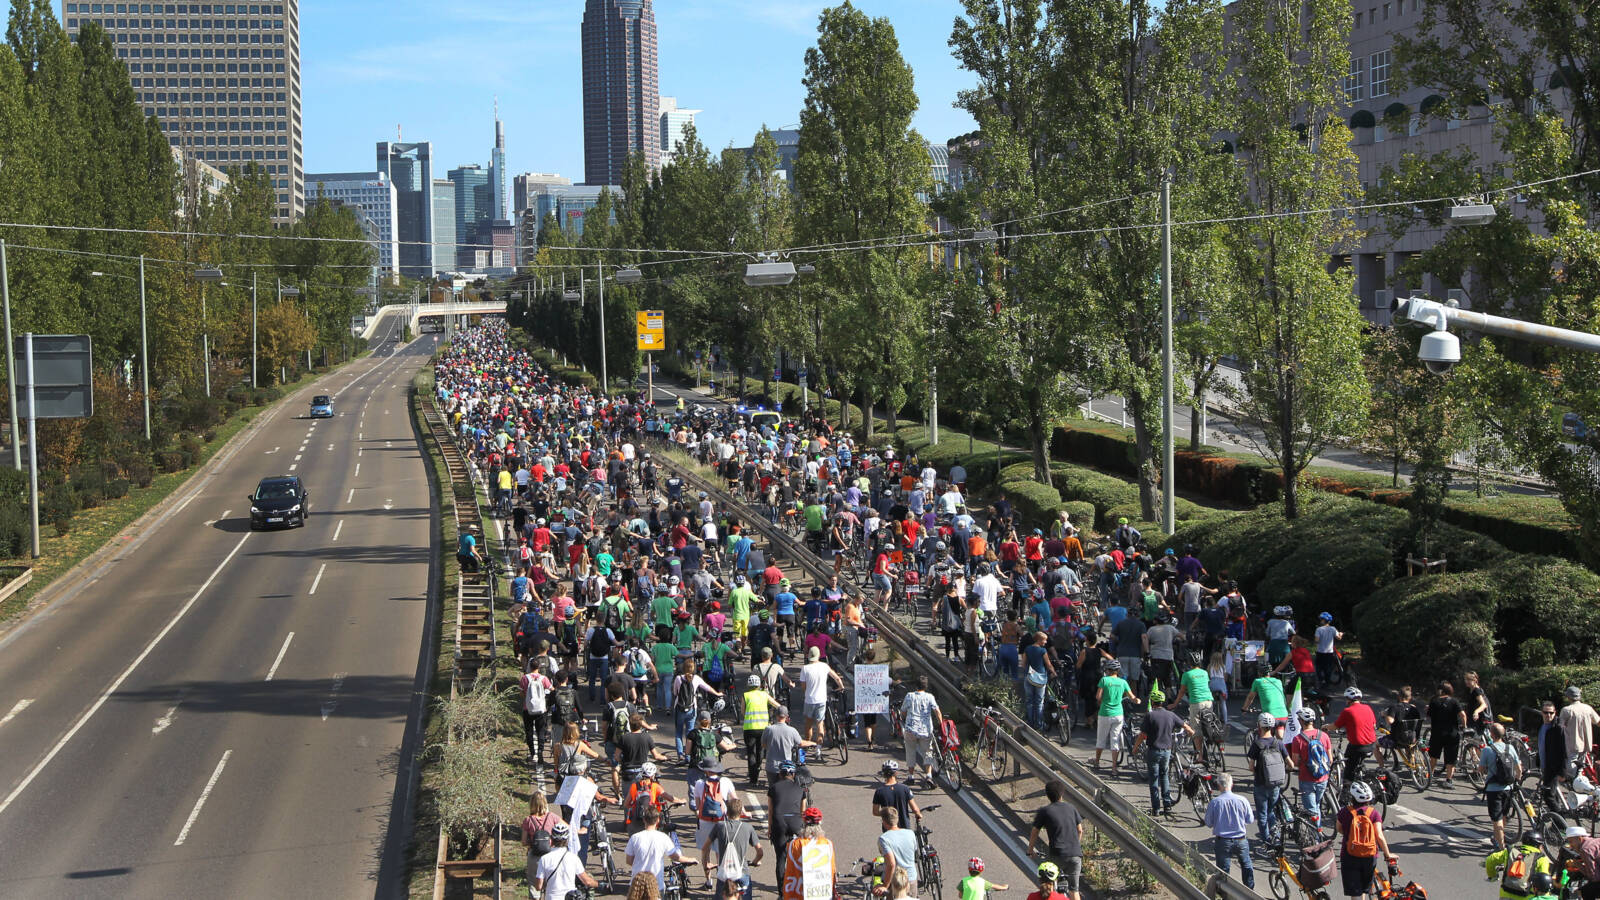 Thousands of cyclists on their way to protest against car corporations' pollution in Germany, AFP photo